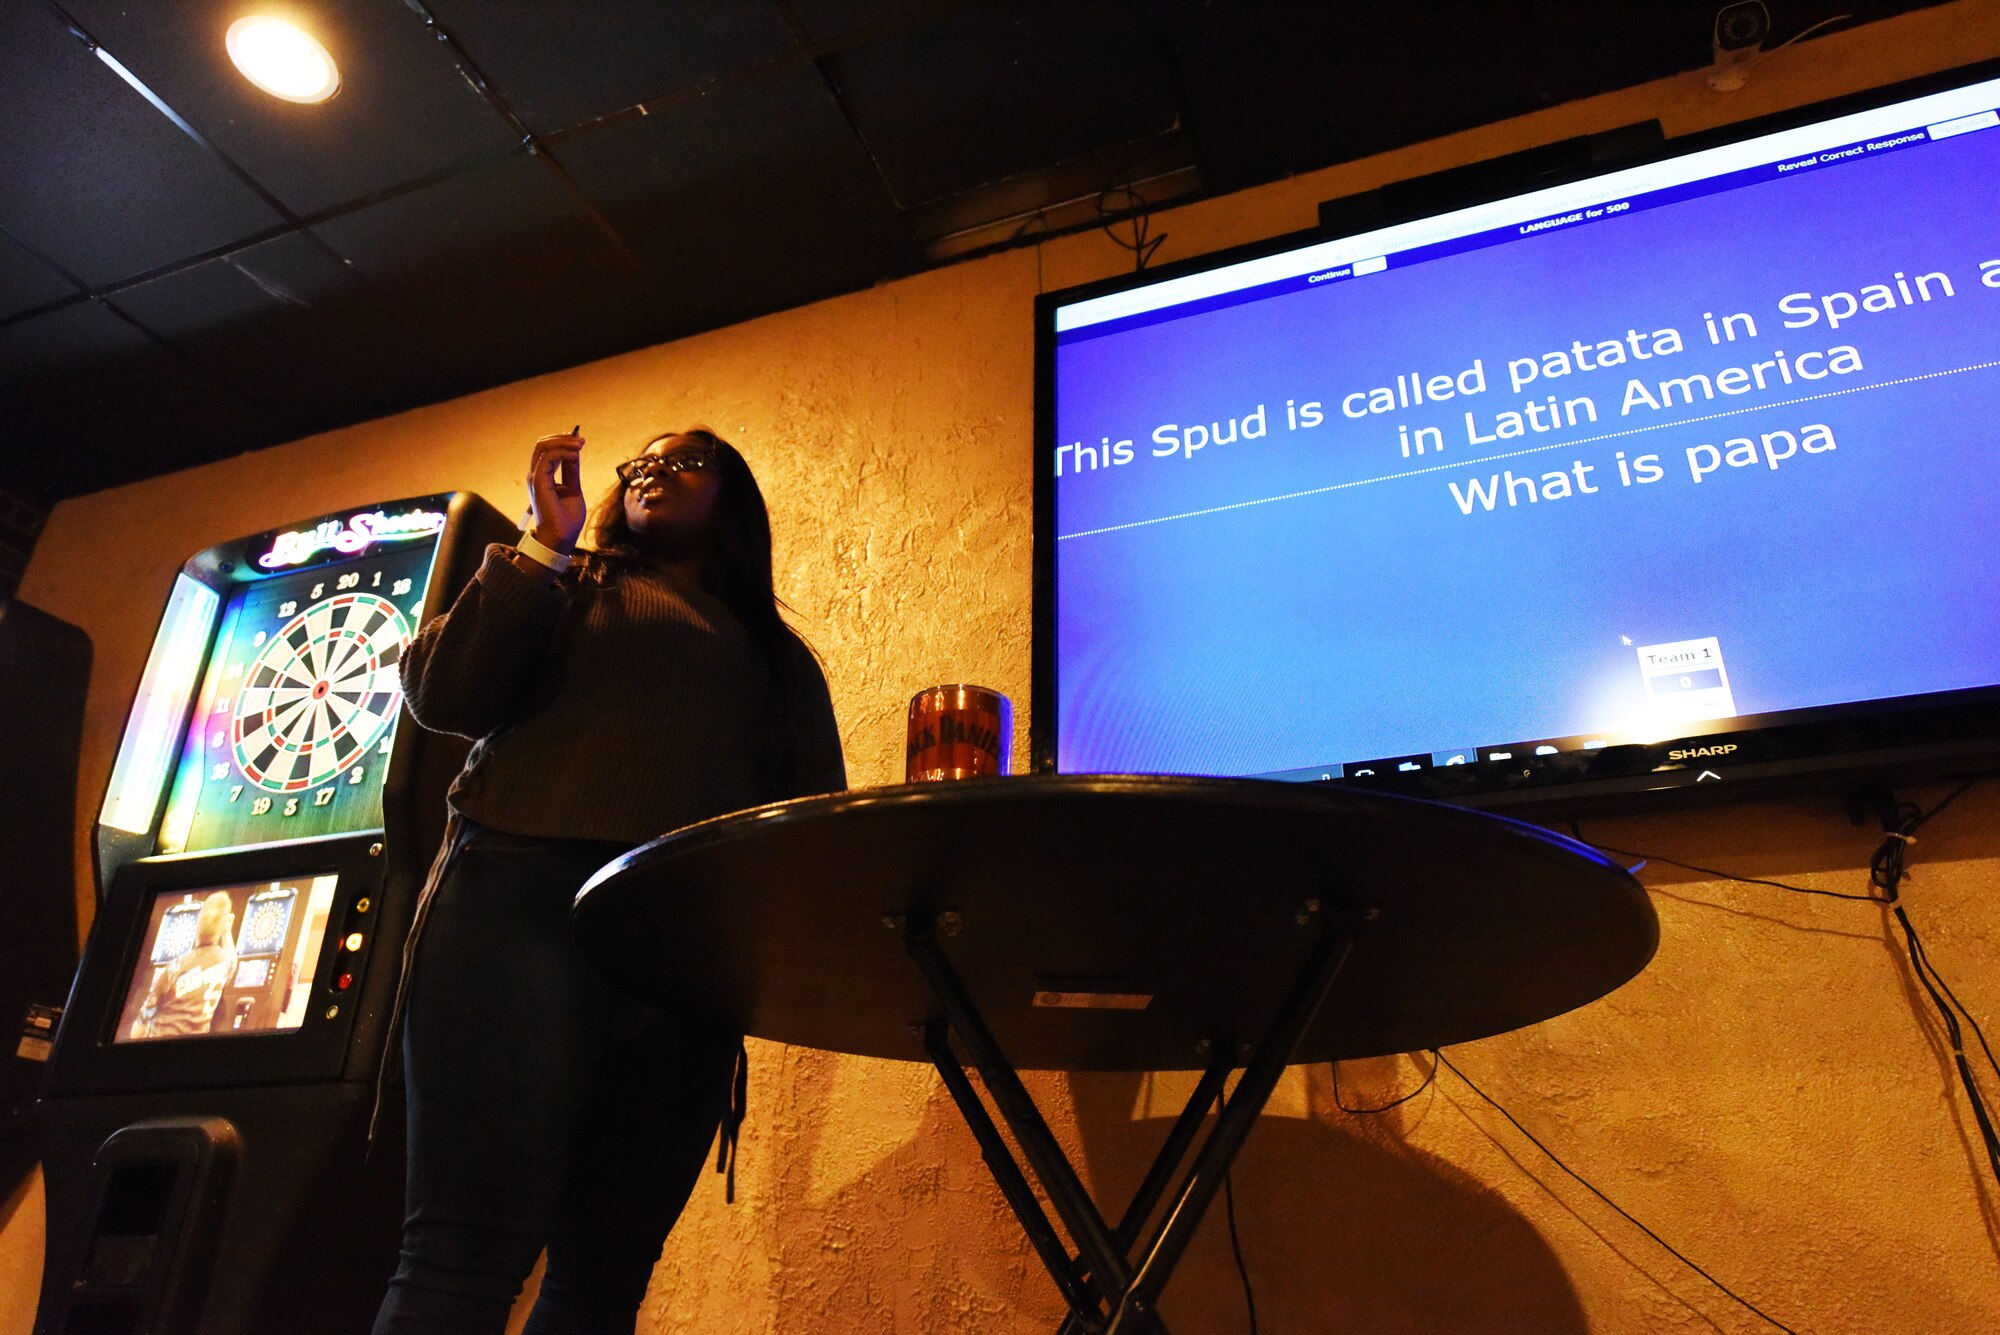 Senior Airman Kashe Smith, a 28th Medical Group public health technician, asks a question about Hispanic culture at Ellsworth Air Force Base, S.D., Oct. 12, 2018. The trivia night was held in celebration of Hispanic Heritage Month, which is celebrated nationwide Sept. 15-Oct. 15. (U.S. Air Force photo by Airman 1st Class Thomas Karol)